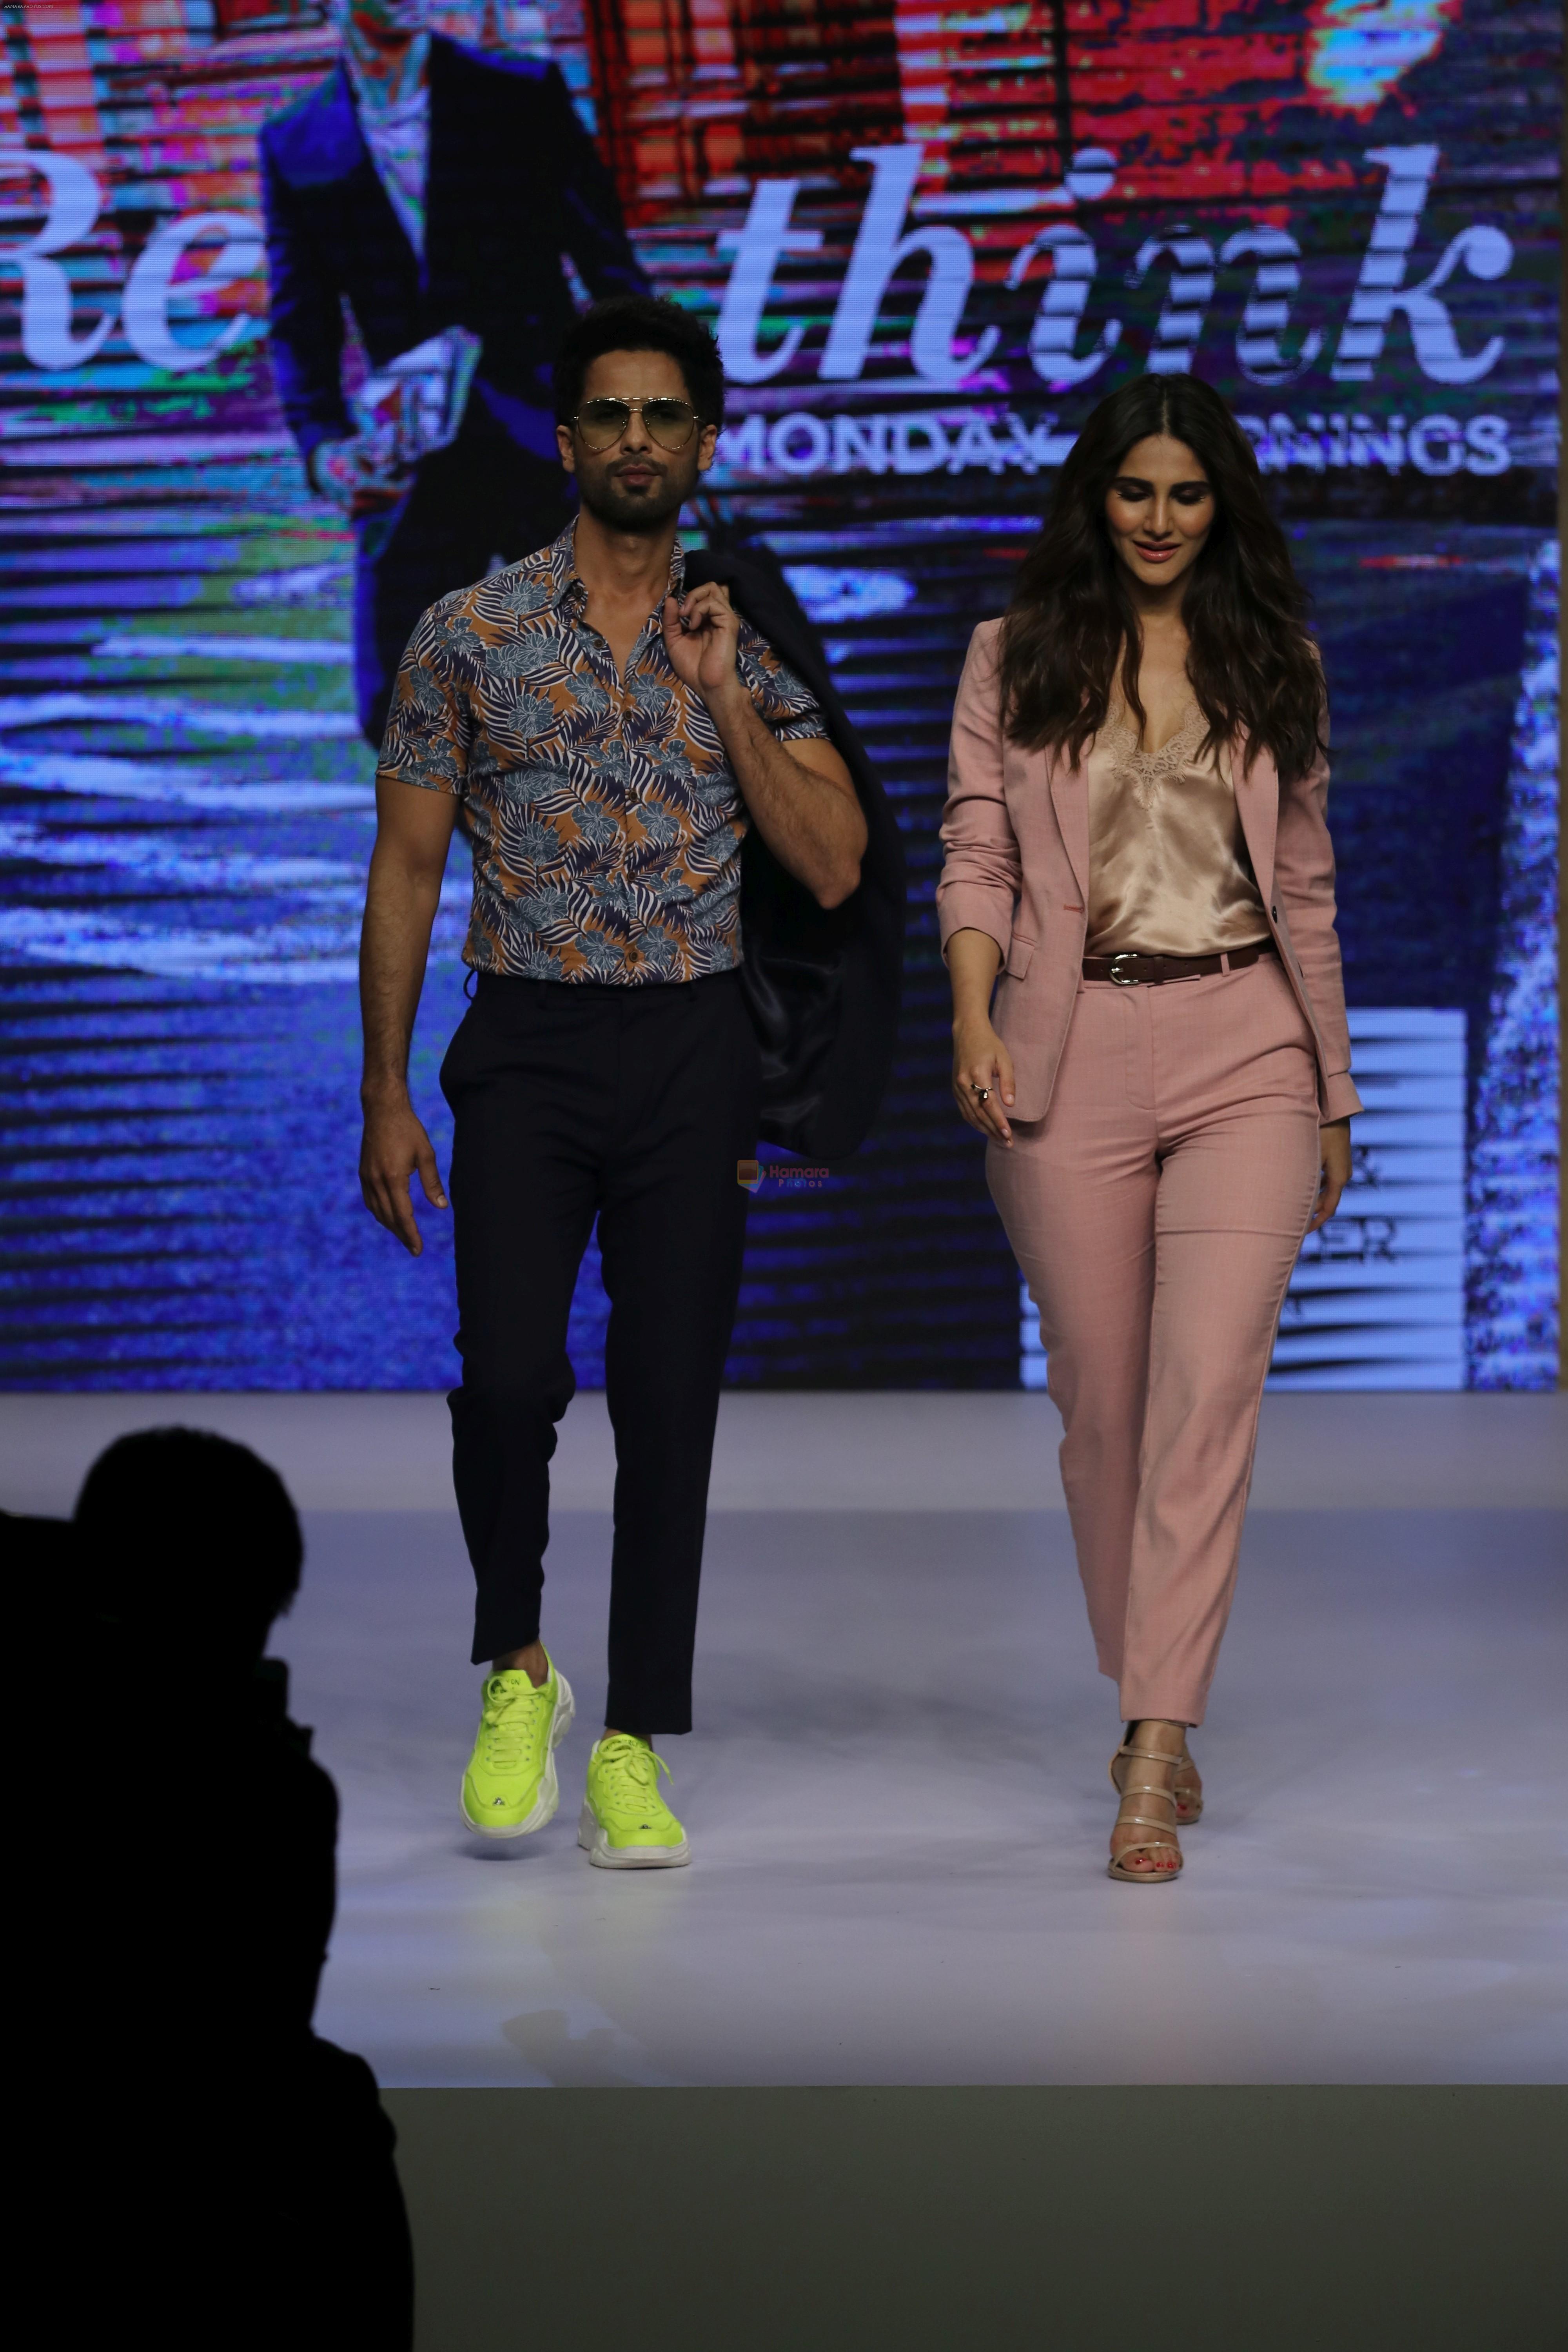 Shahid Kapoor, Vaani Kapoor at Preview of Marks & Spencer Spring Summer Collection 2019 at ITC Grand Central on 7th Feb 2019